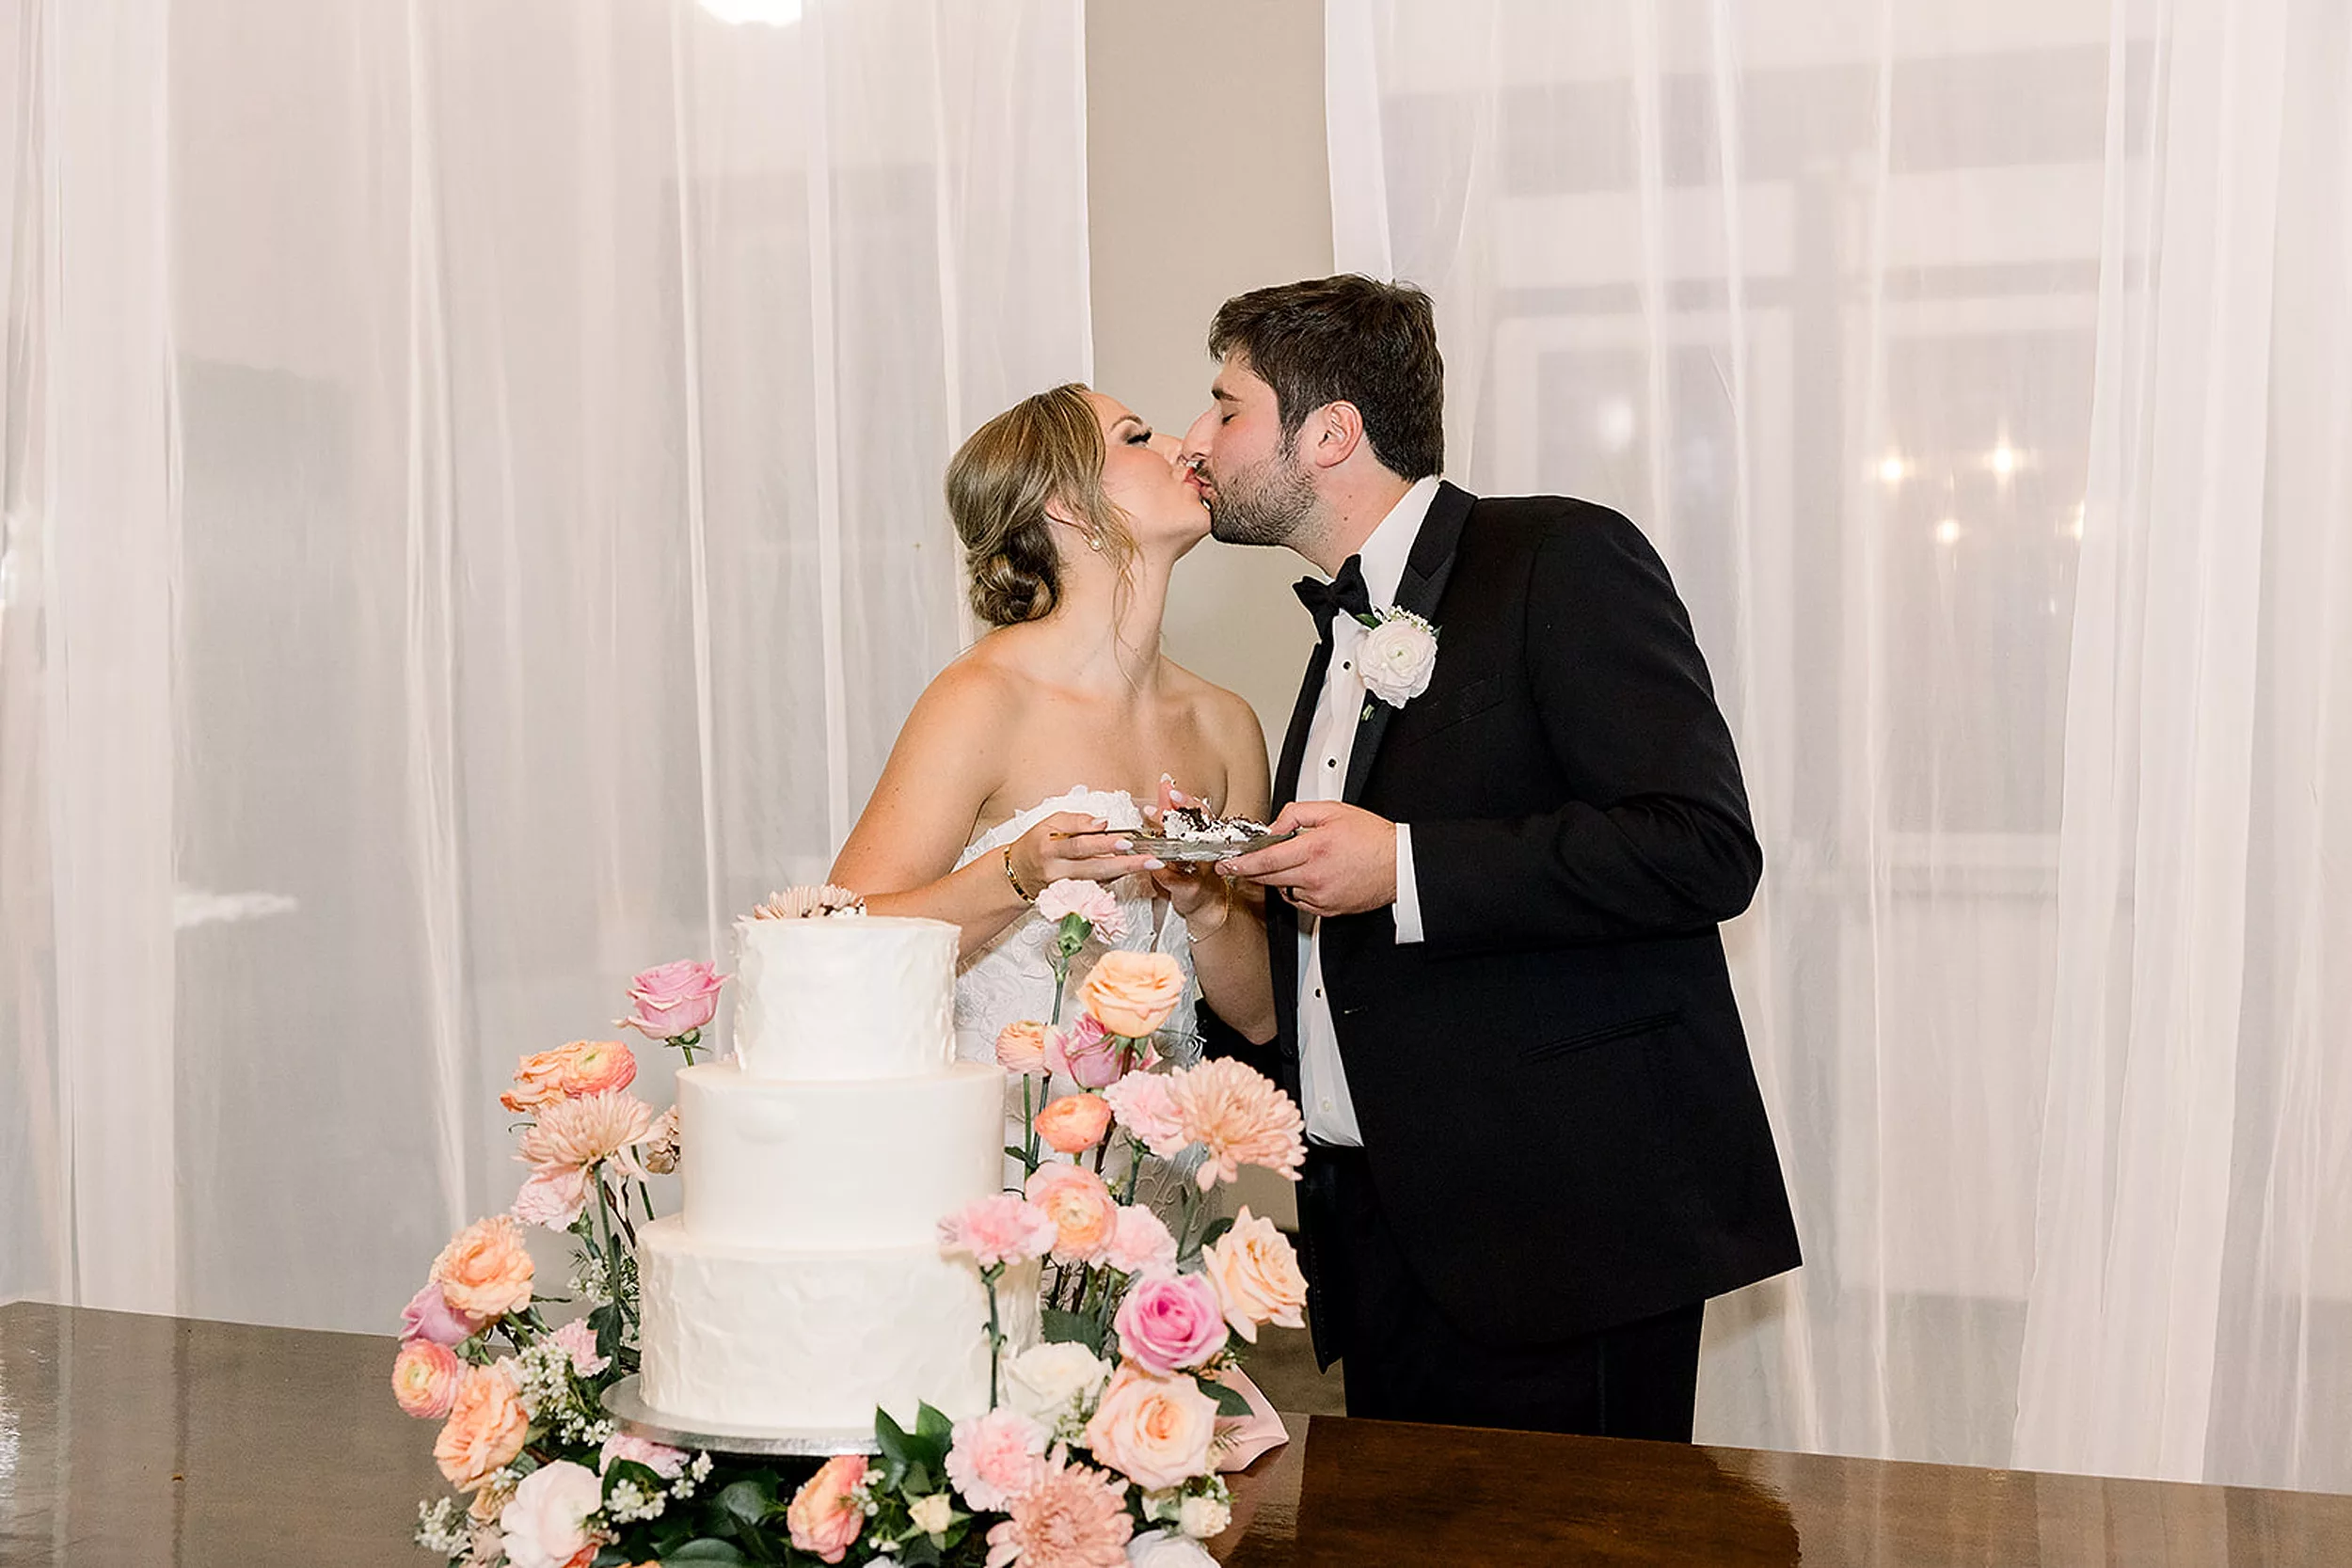 Newlyweds kiss after cutting their three tier cake in a black tuxedo and a lace dress at a White Oaks Vineyard wedding reception